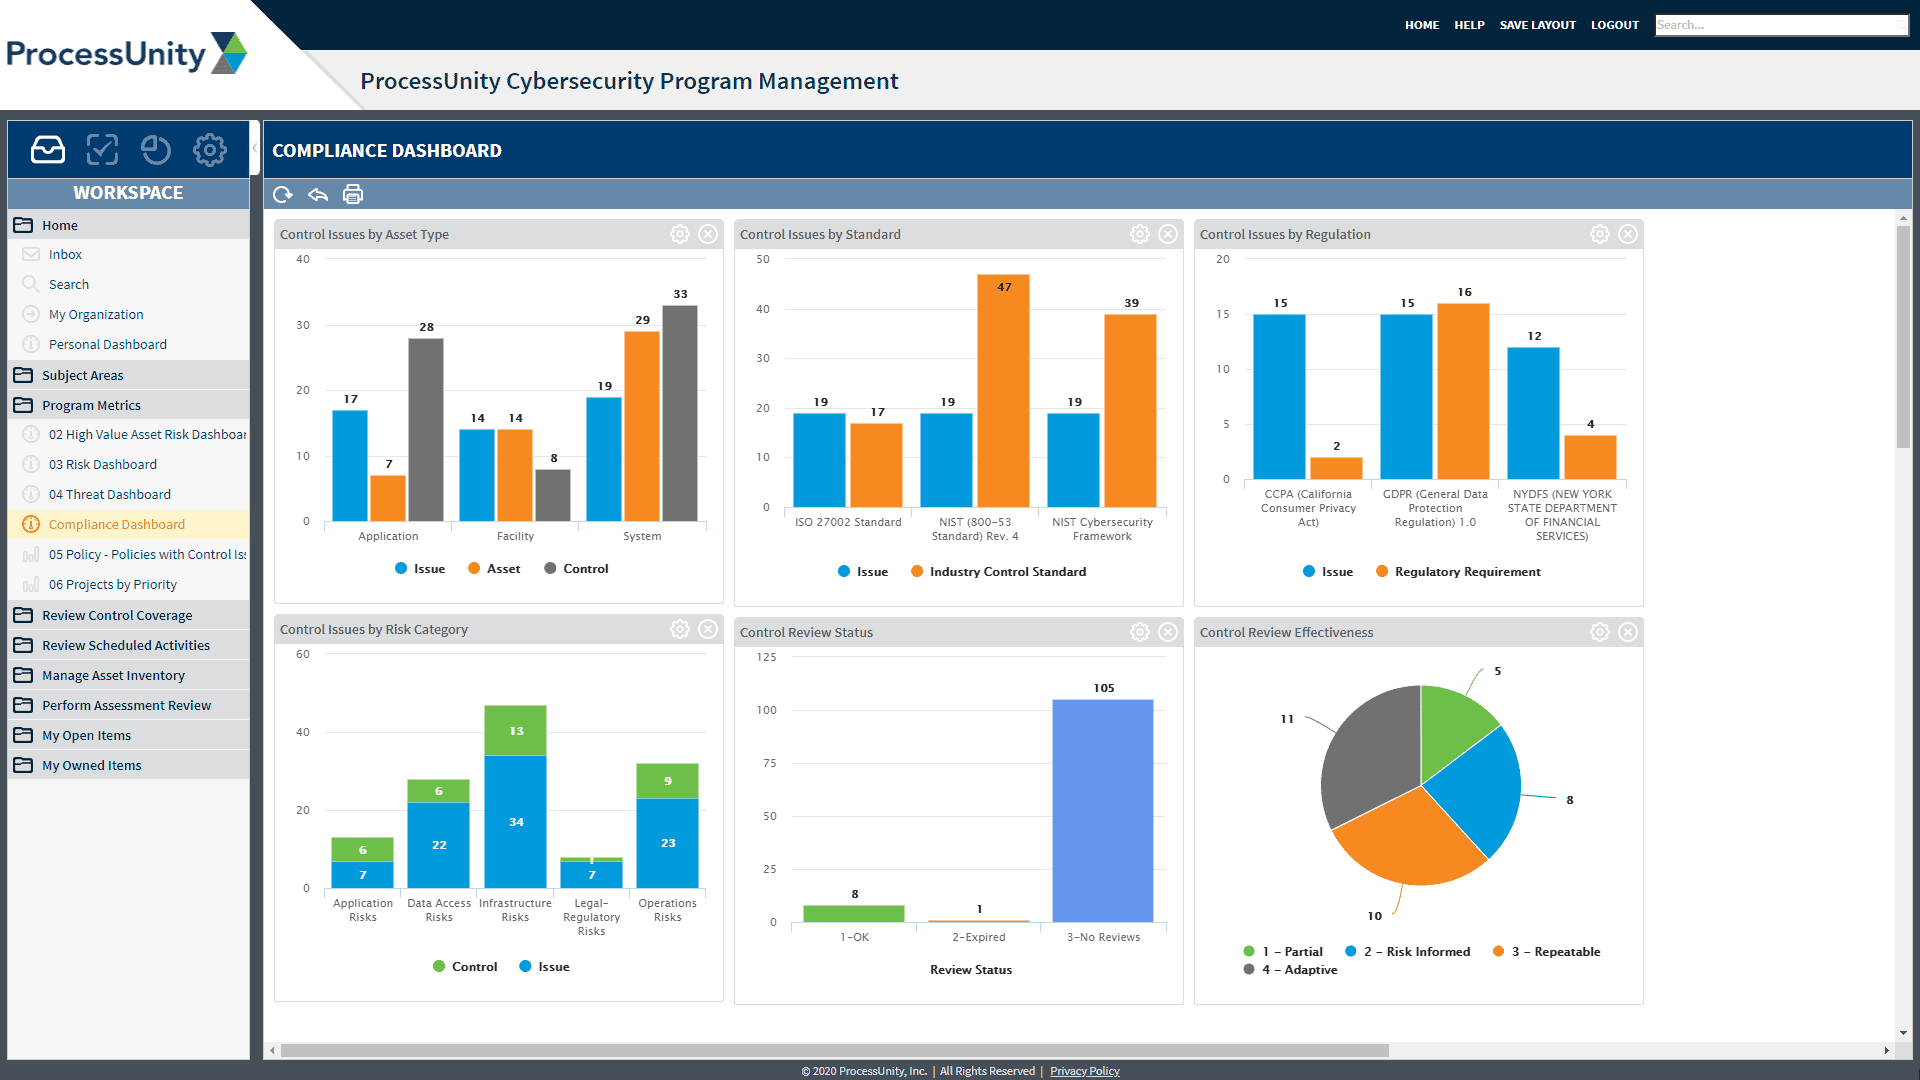 ProcessUnity Cybersecurity Program Management Compliance Dashboard